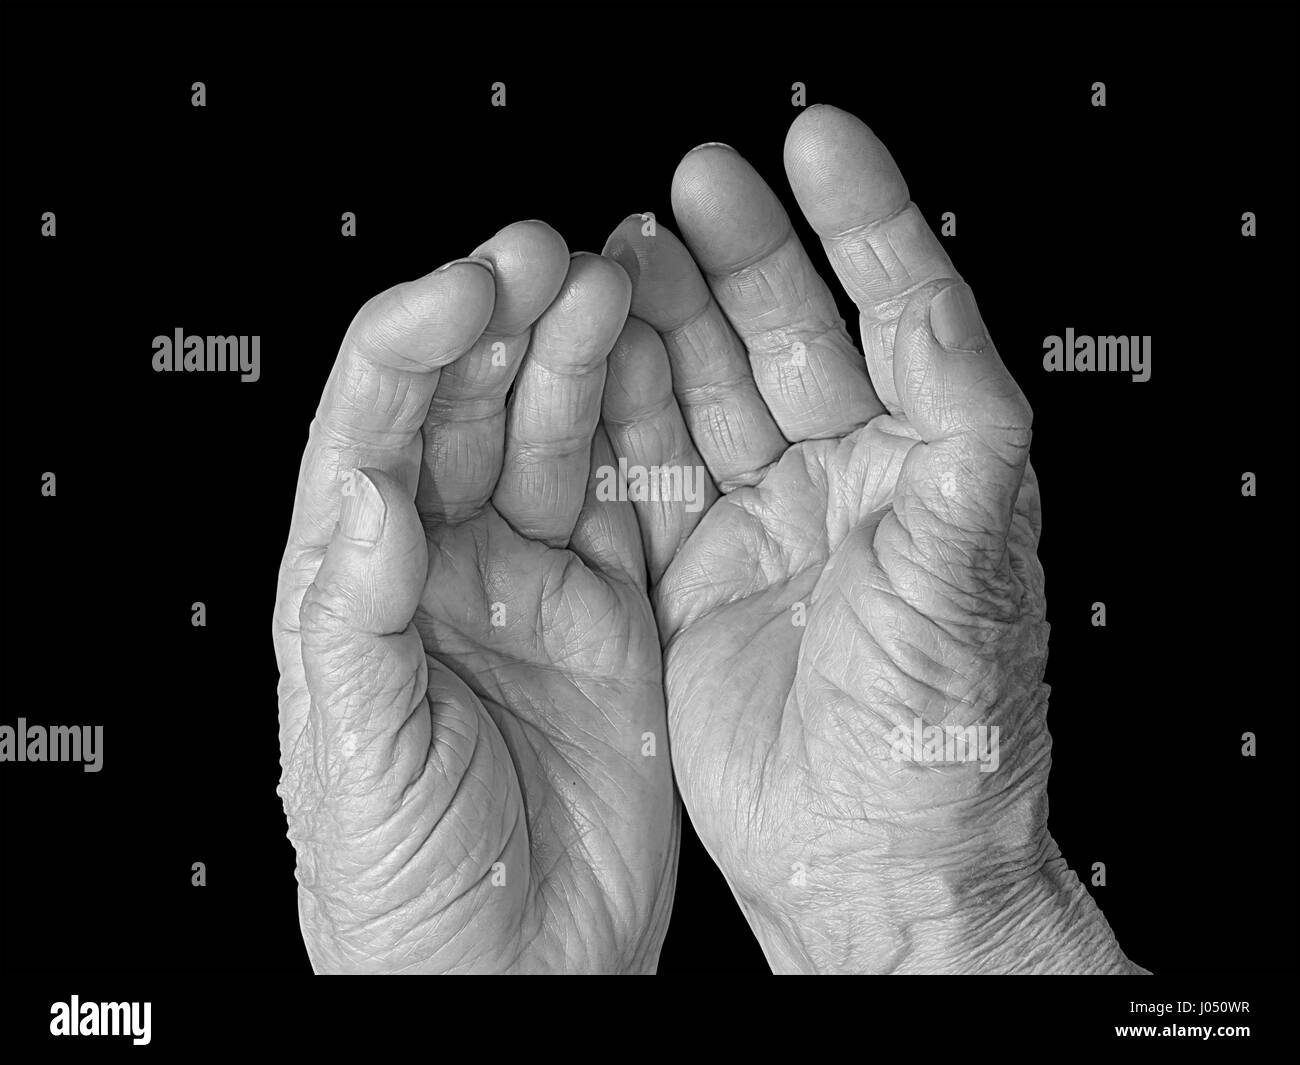 Senior woman outstretched hands, black and white photo. Isolated on black, clipping path included. Stock Photo